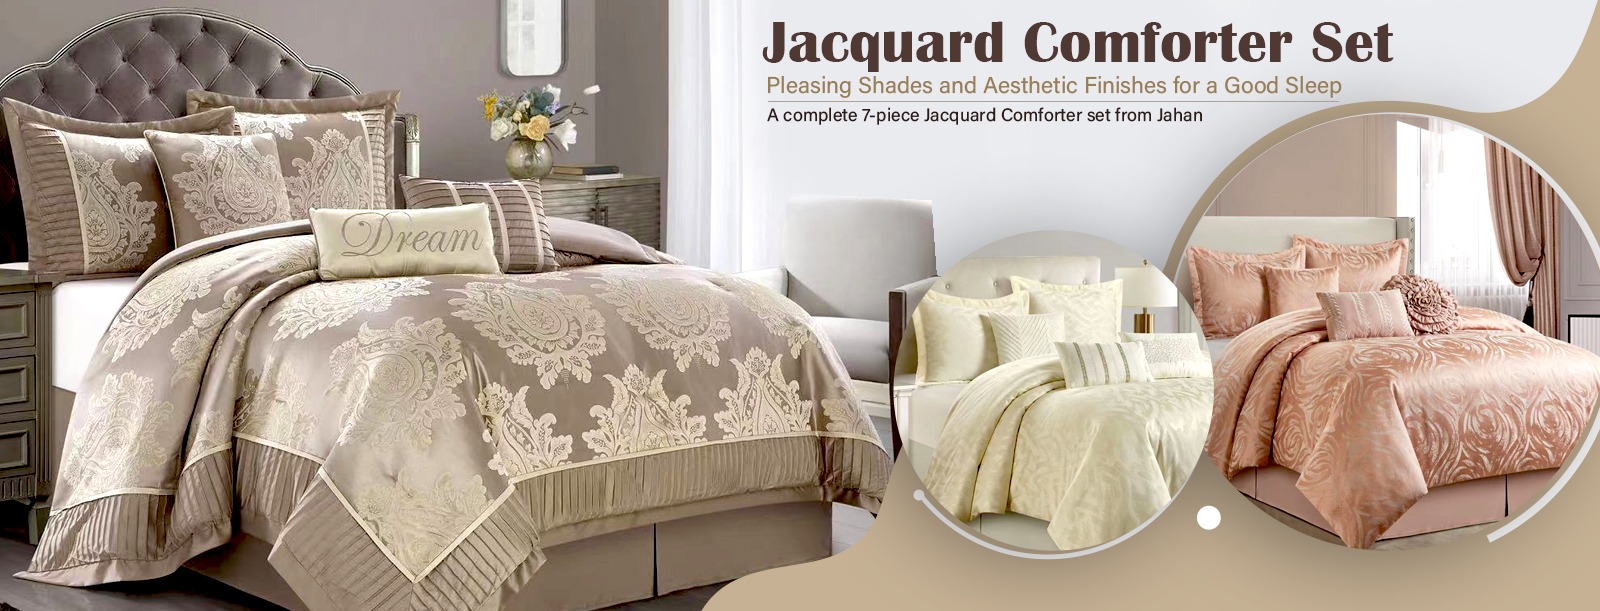 jacquard cushions suppliers in Canada